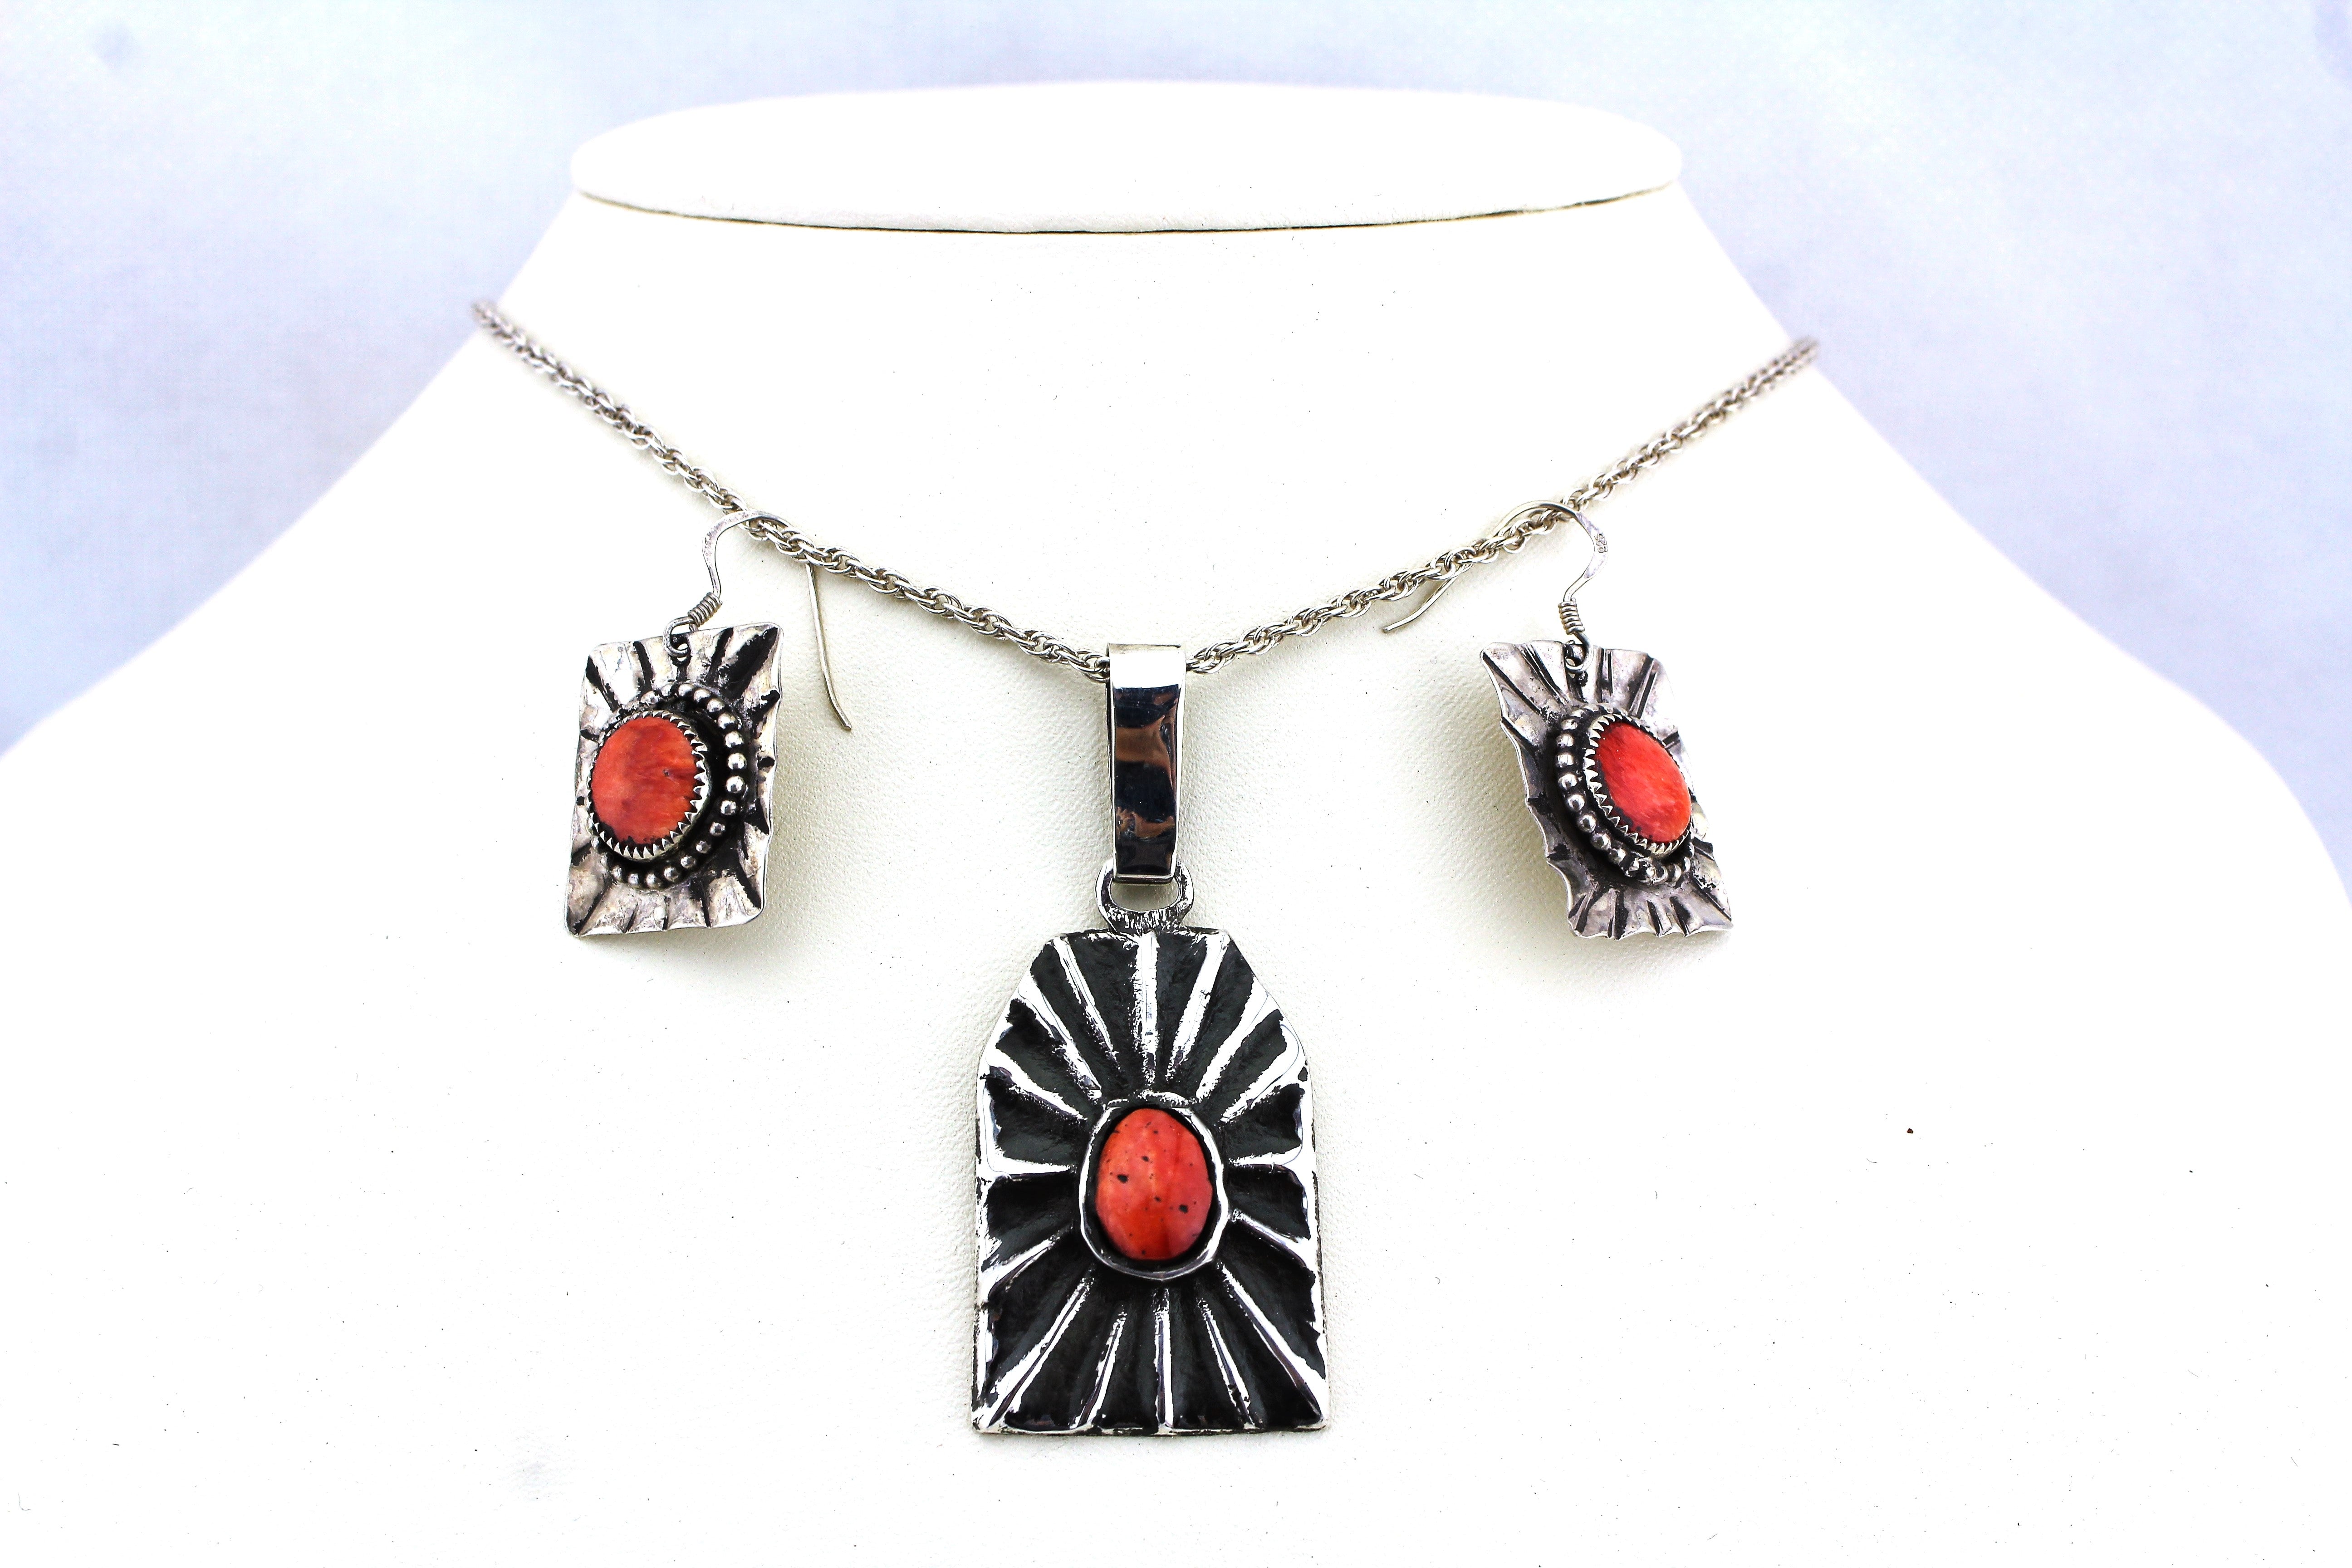 Merlin James Necklace and Earring Set